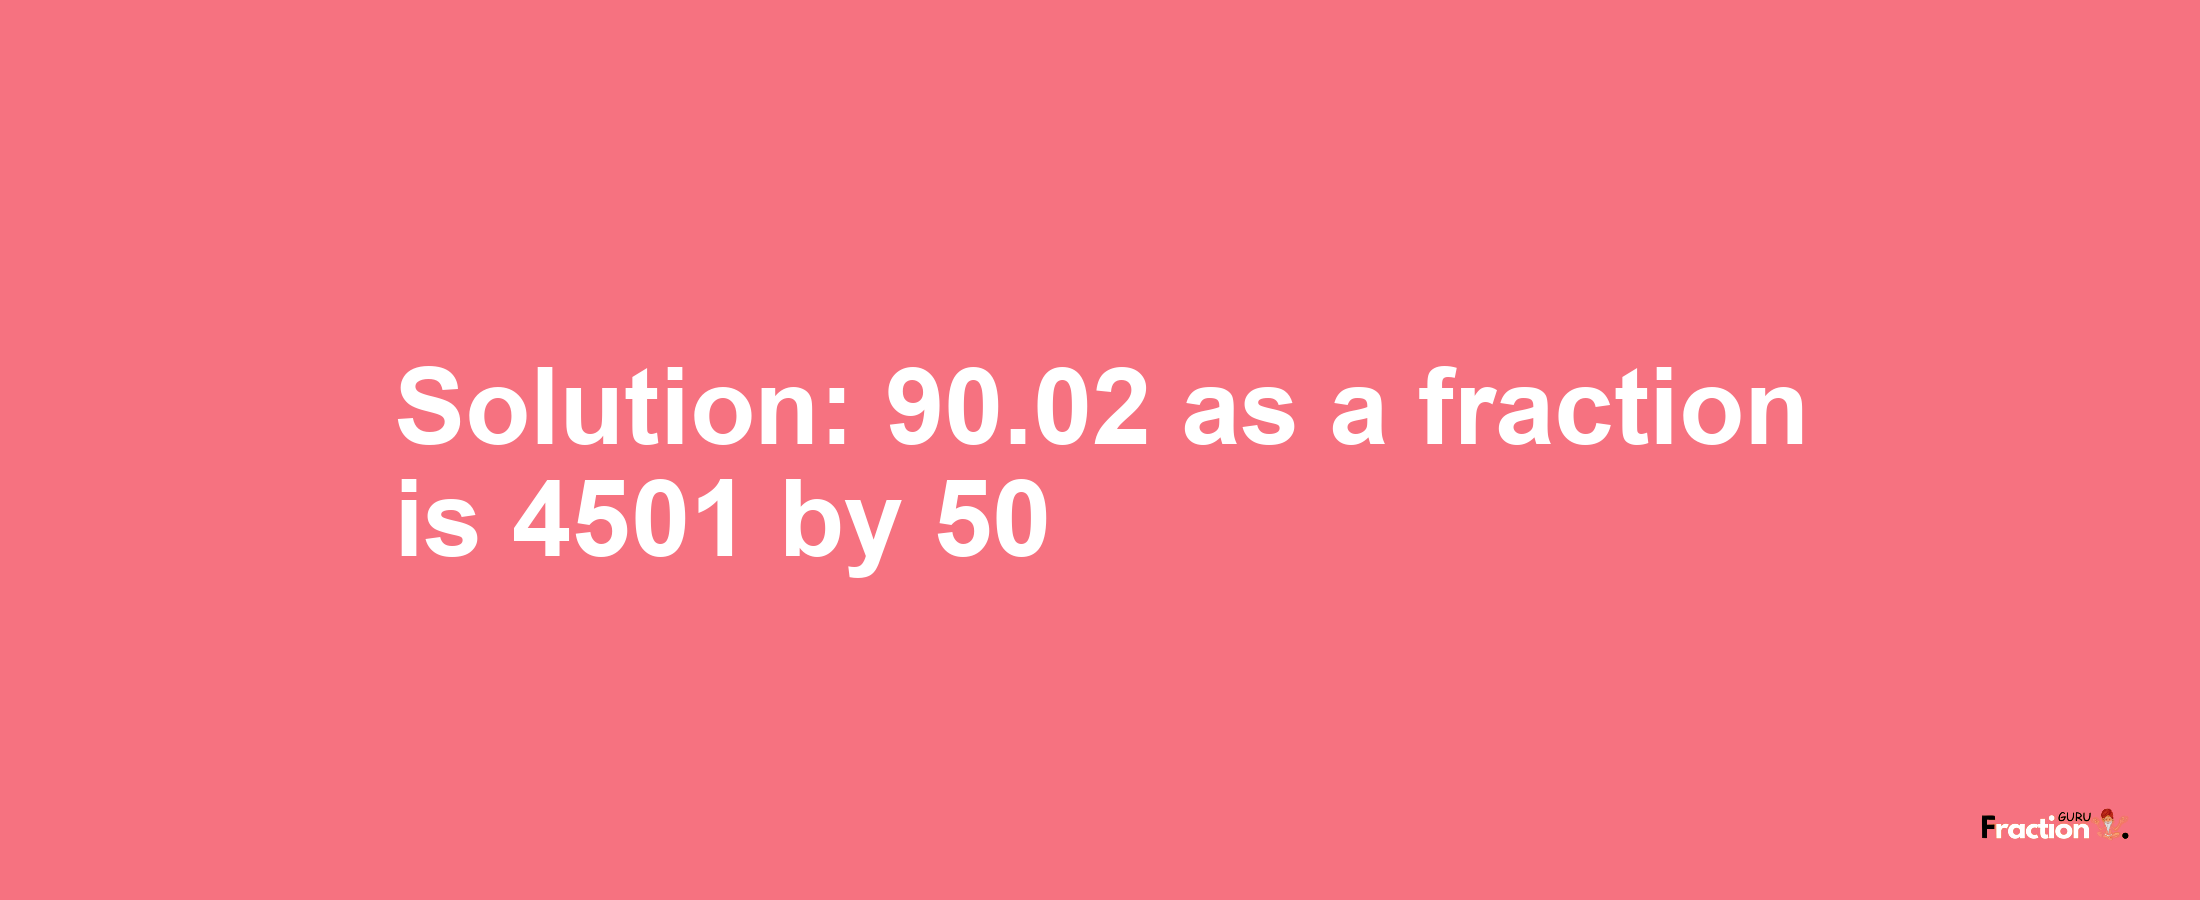 Solution:90.02 as a fraction is 4501/50